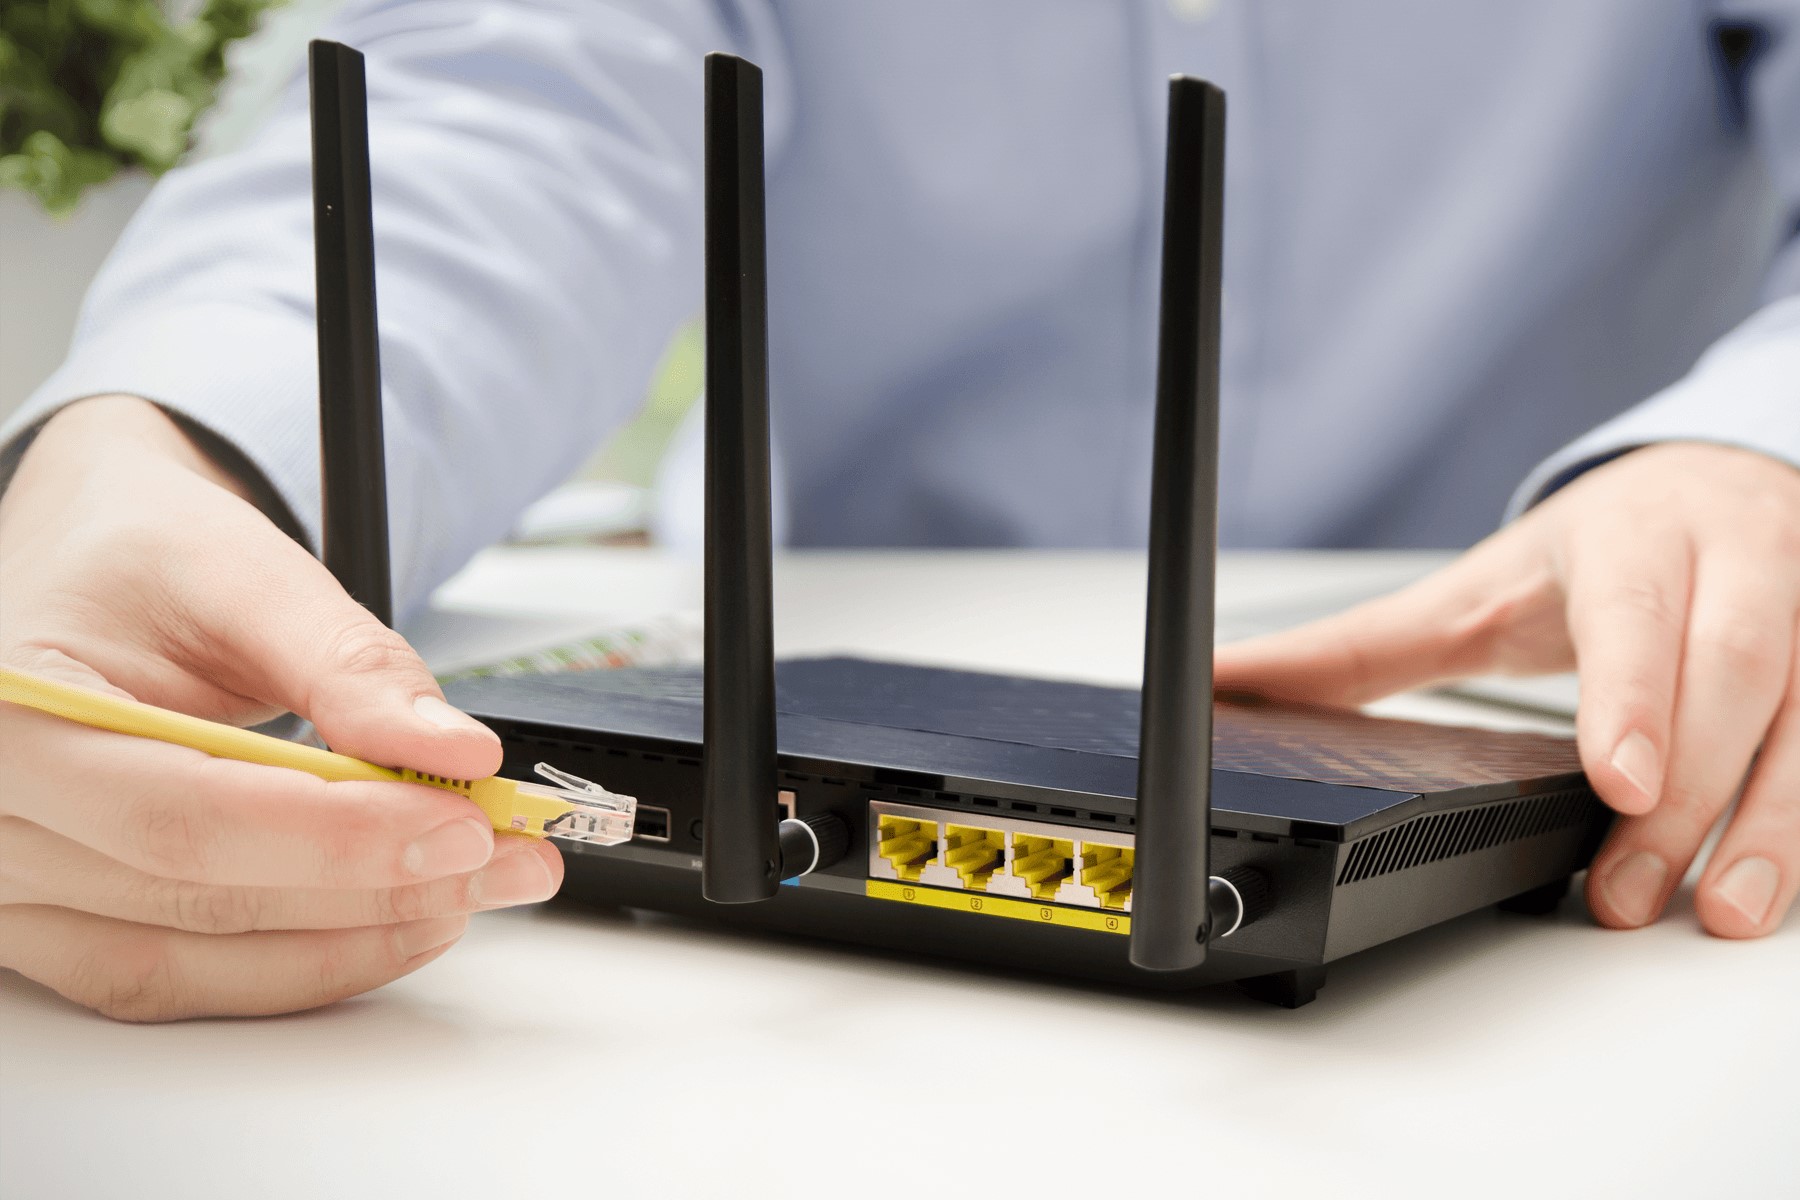 How To Connect A Wi-Fi Router To An Existing Network